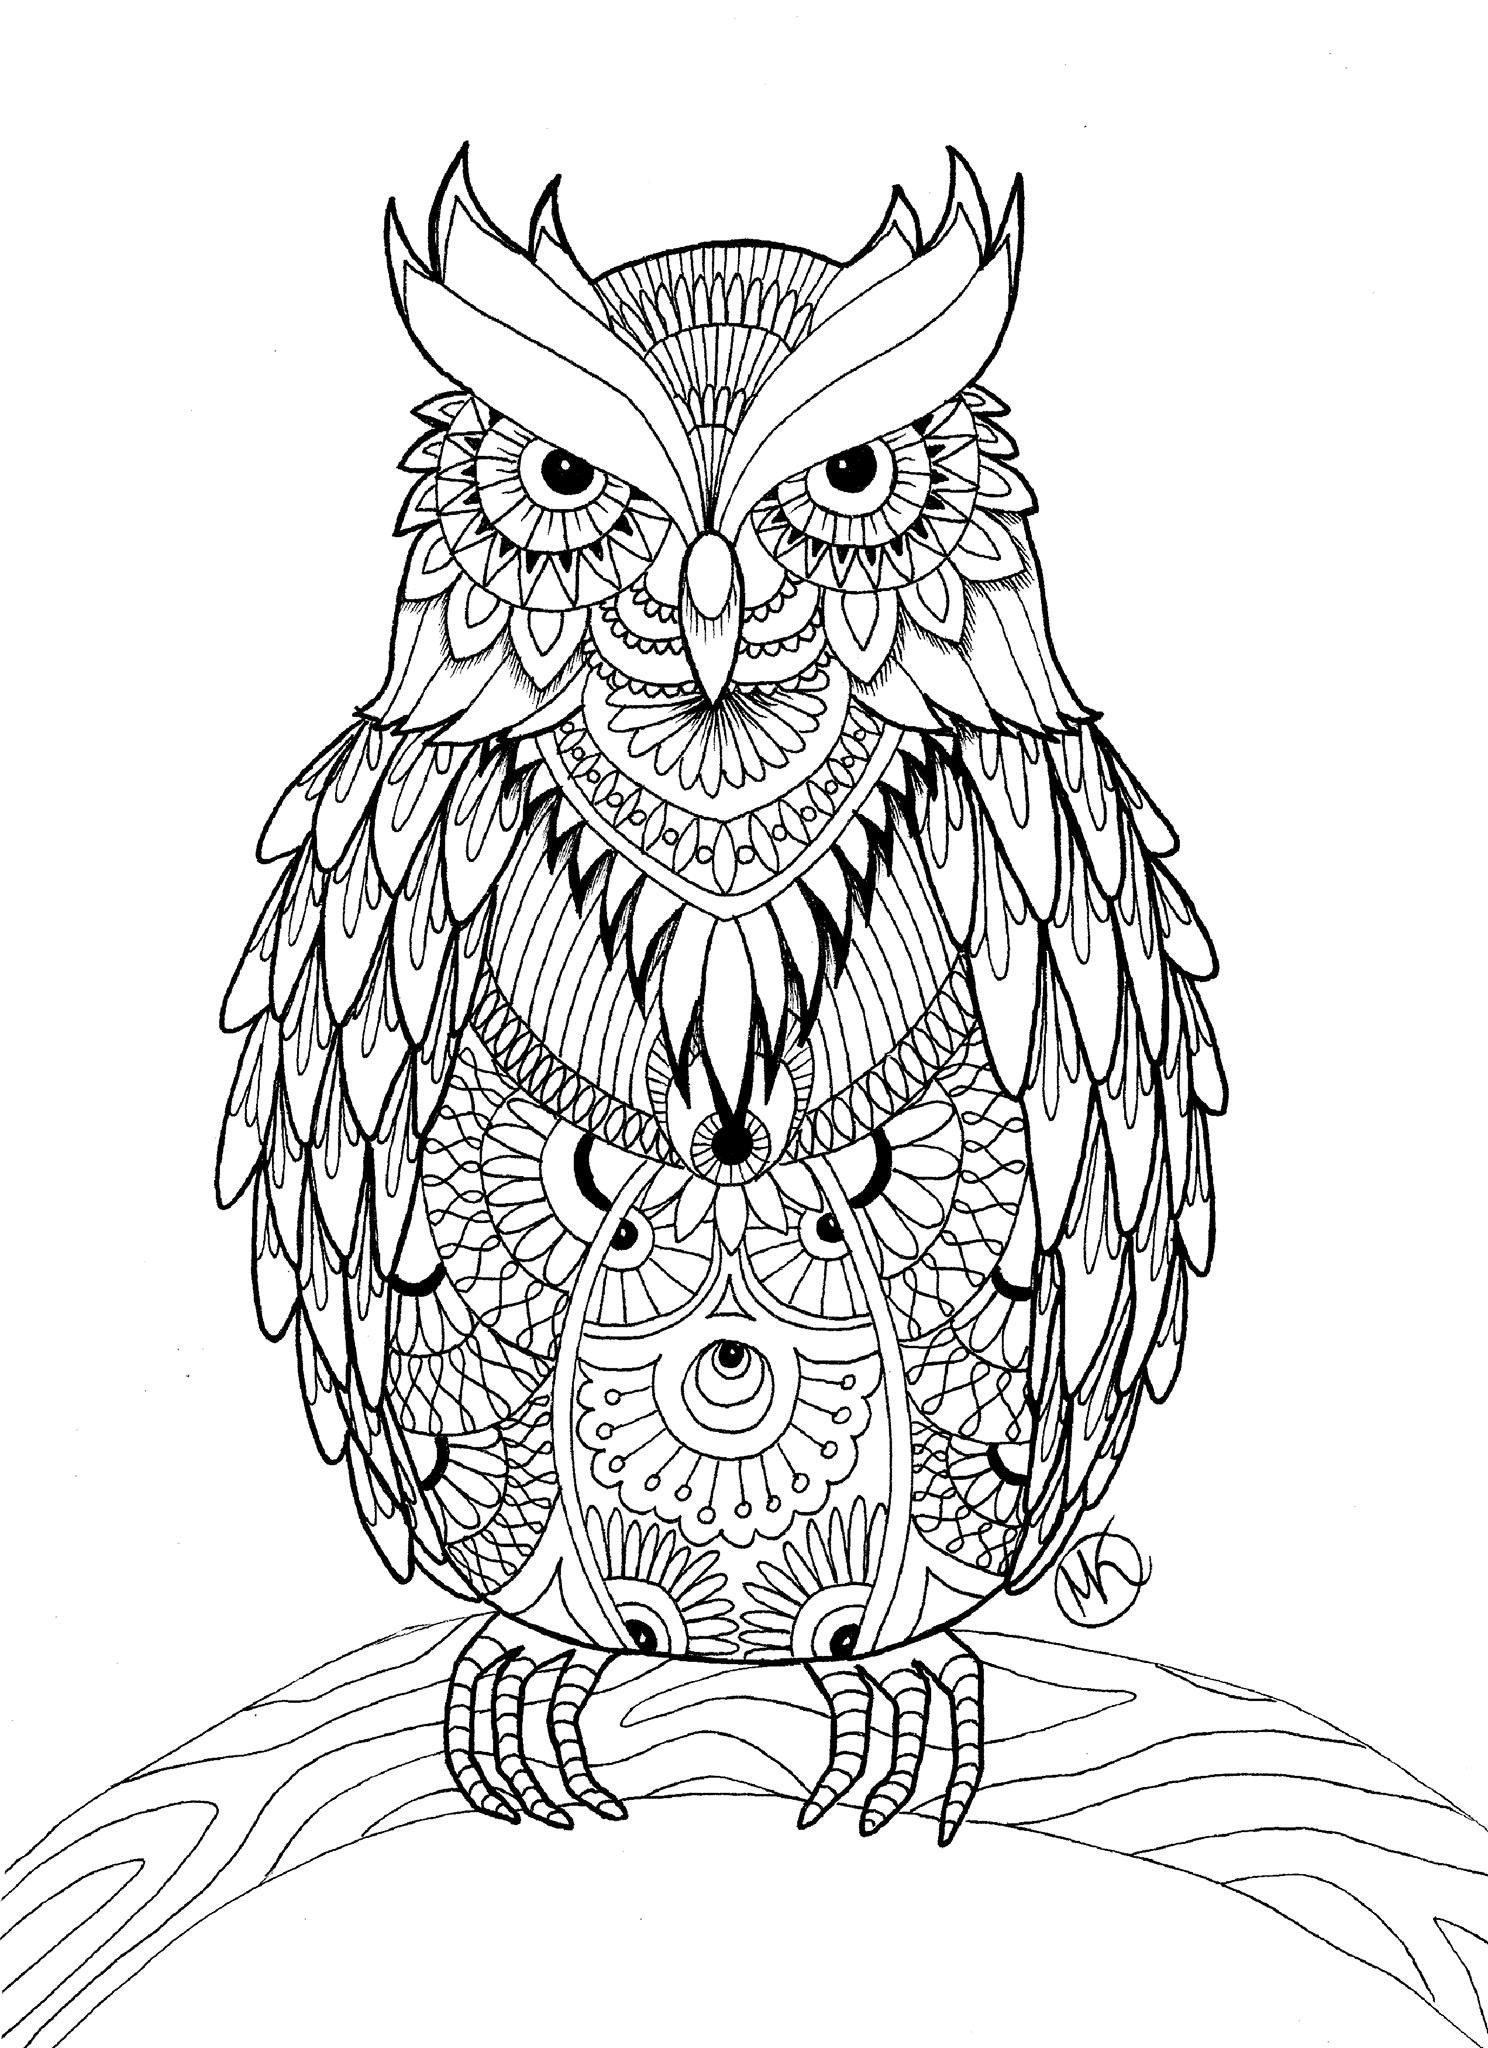 Watercolor Coloring Books For Adults
 OWL Coloring Pages for Adults Free Detailed Owl Coloring